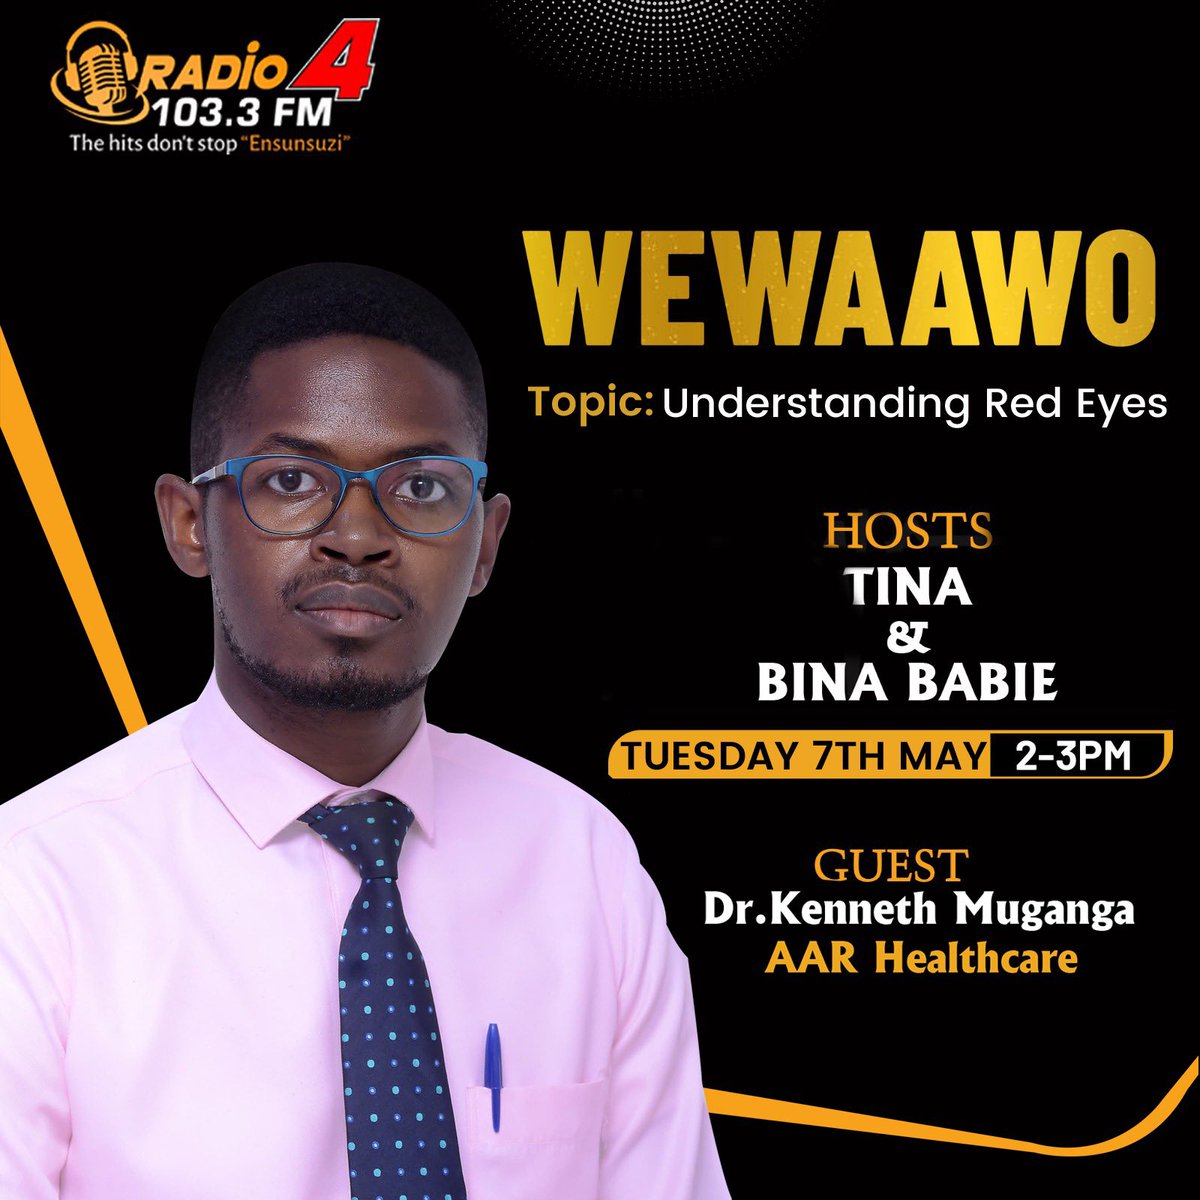 Join the conversation about 'Red Eyes' today at 2 PM with Dr. Kenneth Muganga on 103.3, Ensunsuzi. Leave a question/inquiry in the comment section. #Wewaawo || #Radio4UG